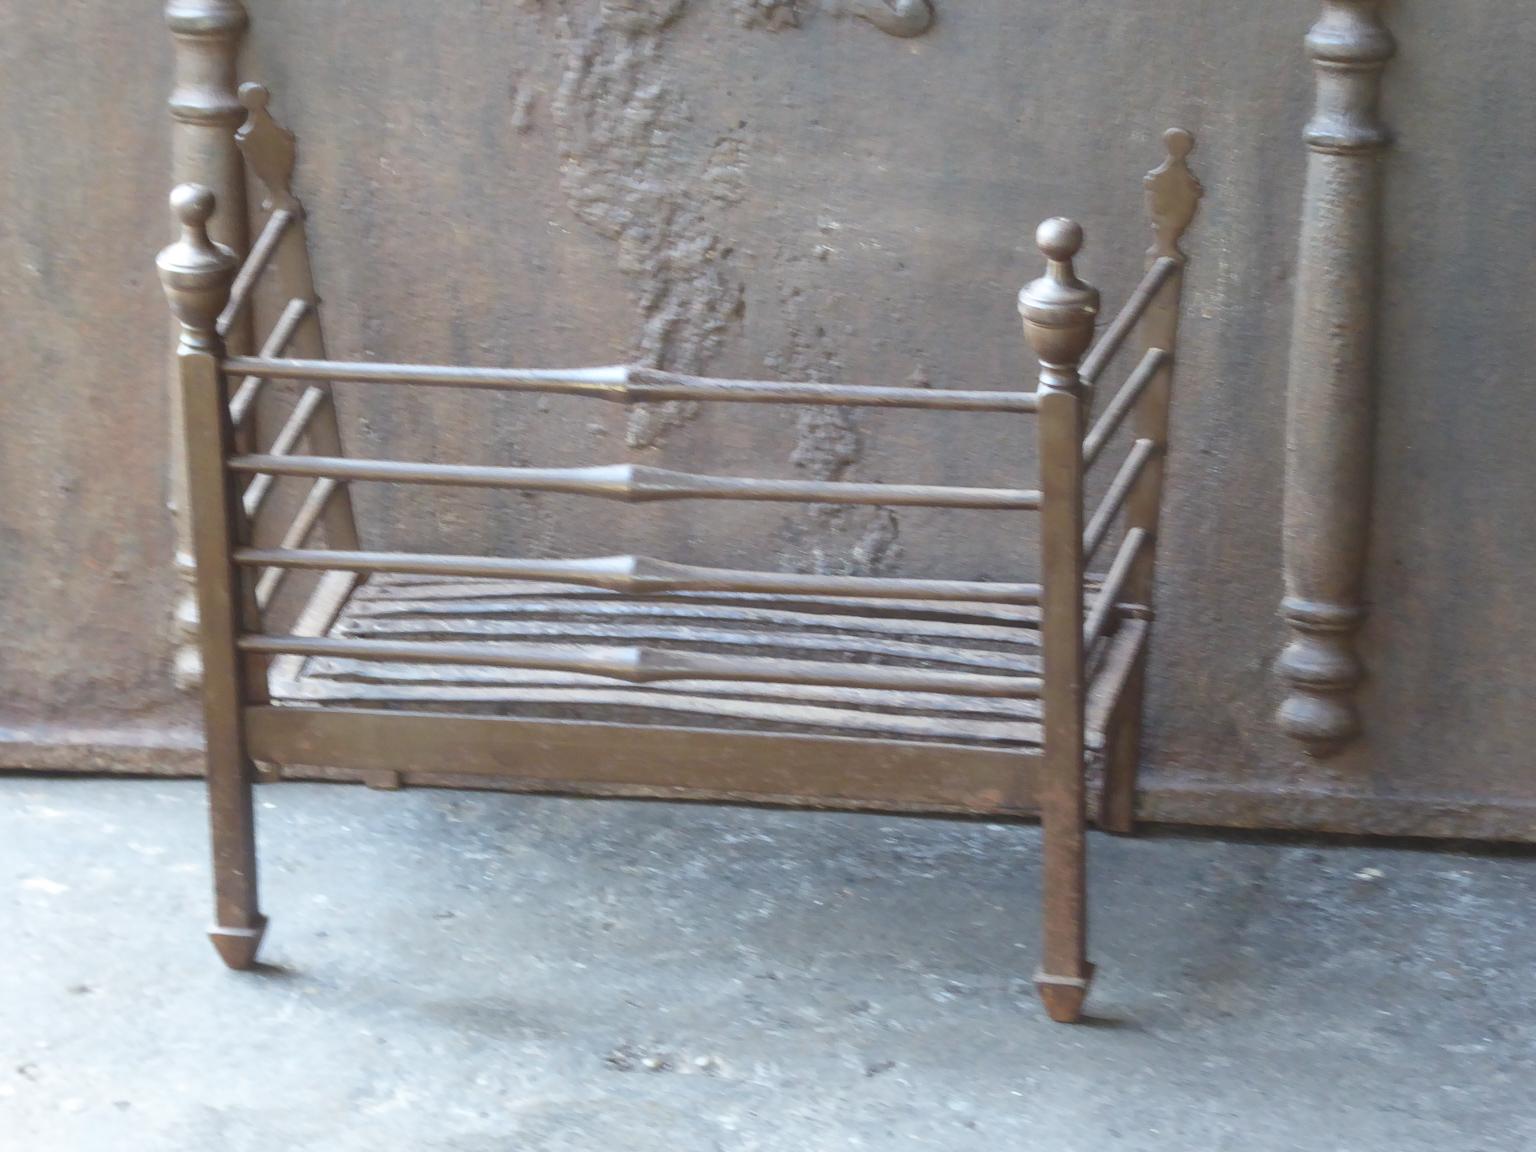 Neoclassical 18th-19th Century Dutch Fireplace Grate or Fire Basket